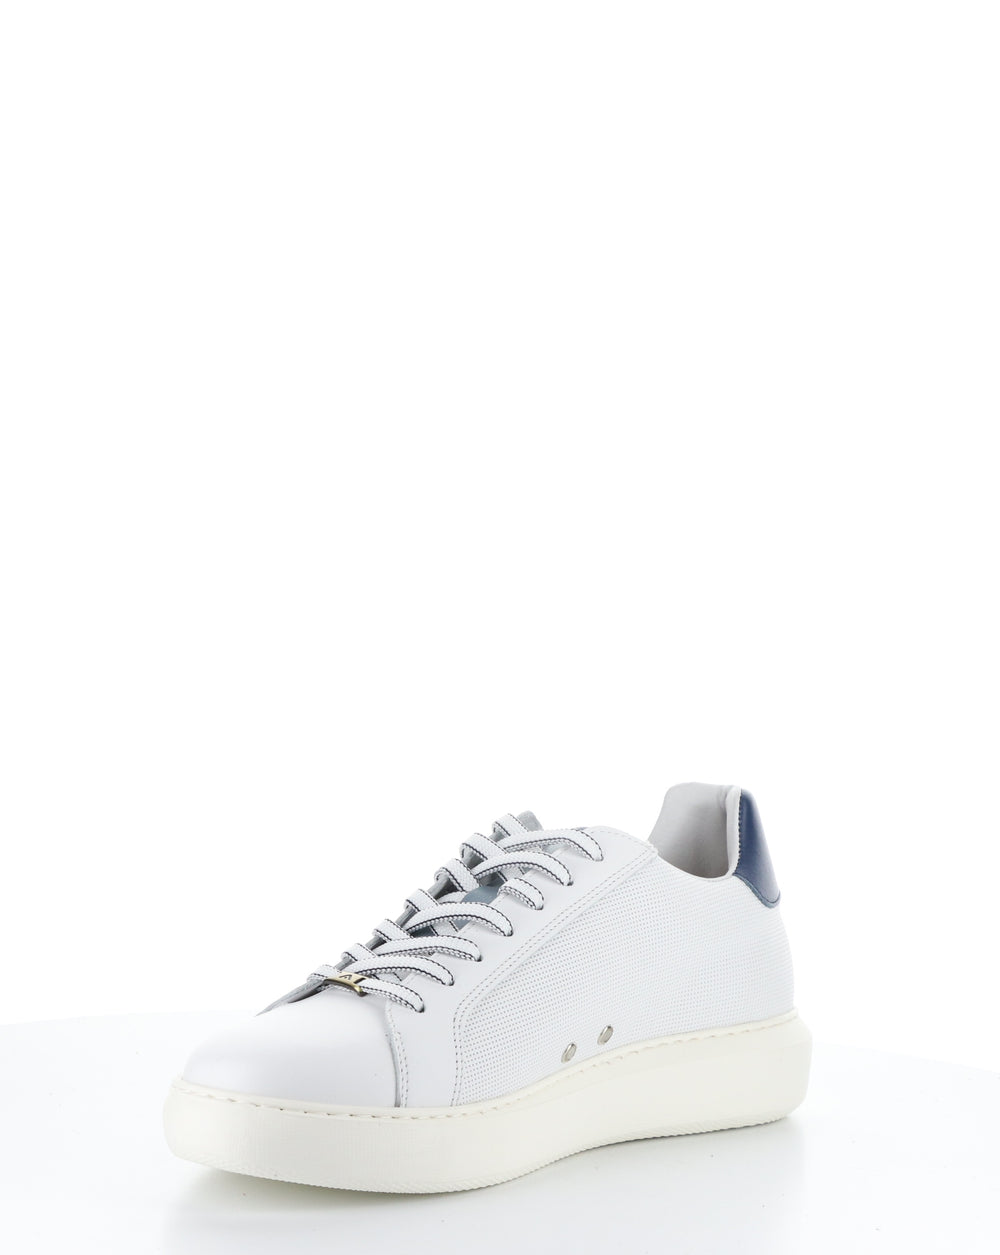 10634A OFF WHITE/BLUE/NAVY Lace-up Shoes